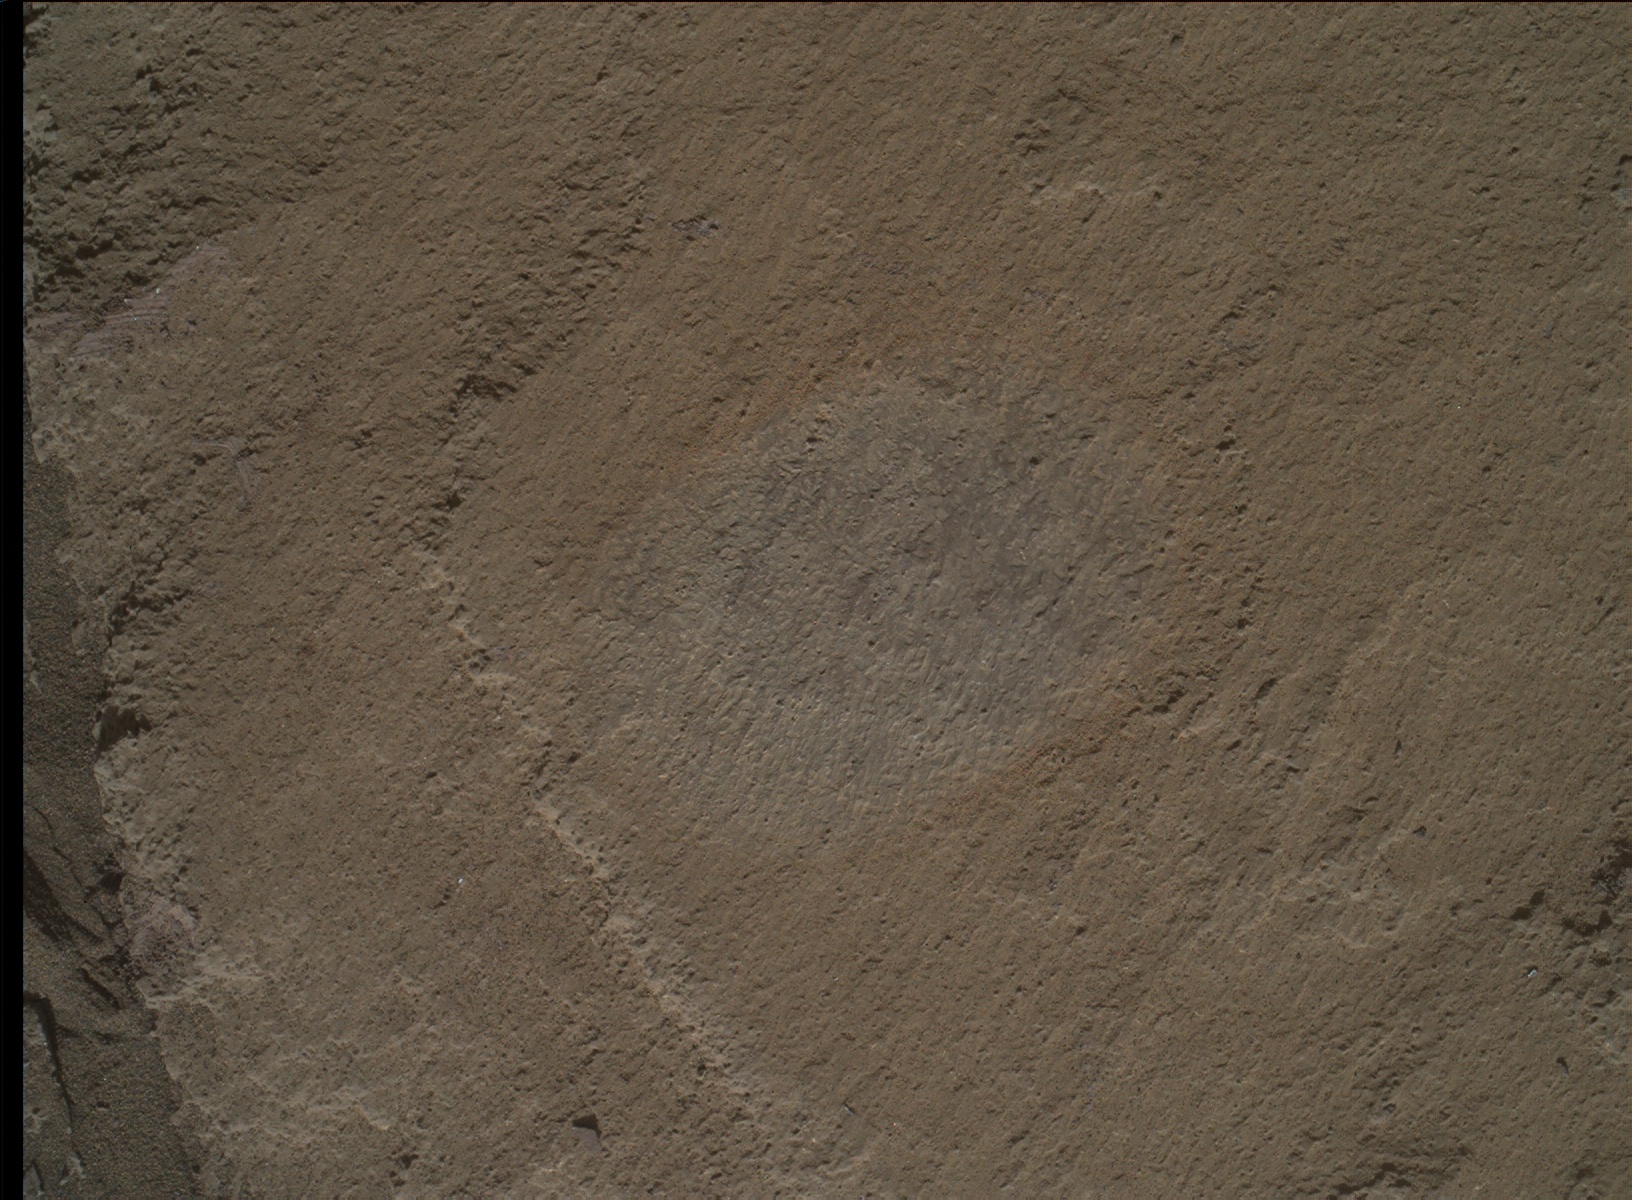 Nasa's Mars rover Curiosity acquired this image using its Mars Hand Lens Imager (MAHLI) on Sol 1245